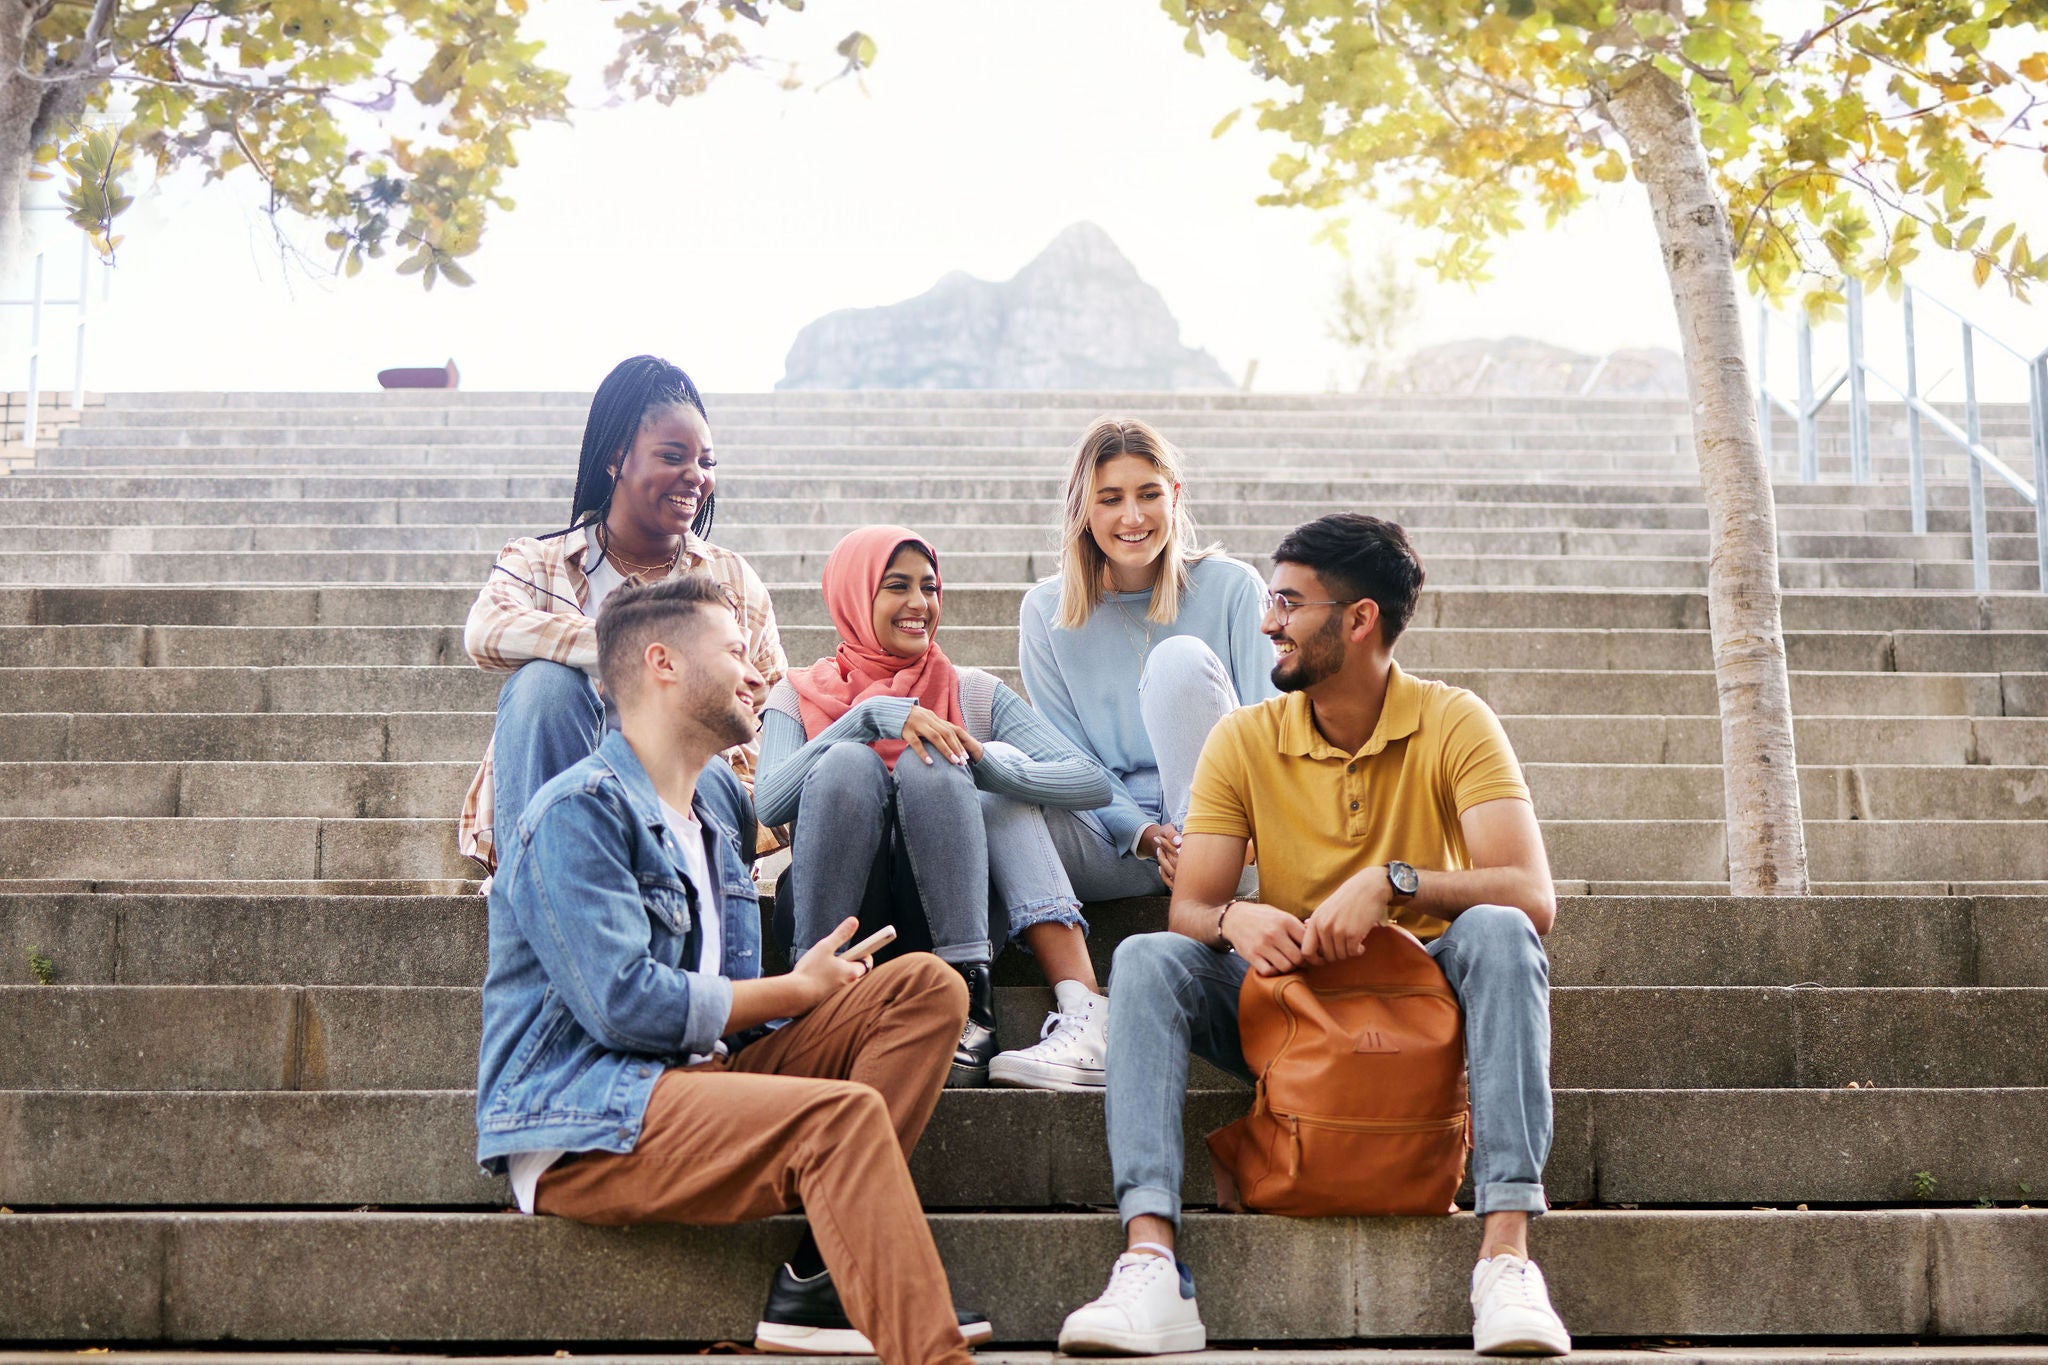 Relax, friends or students on stairs at break talking or speaking of future goals or education on campus. Diversity, school or happy young people in university or college bonding in fun conversation.